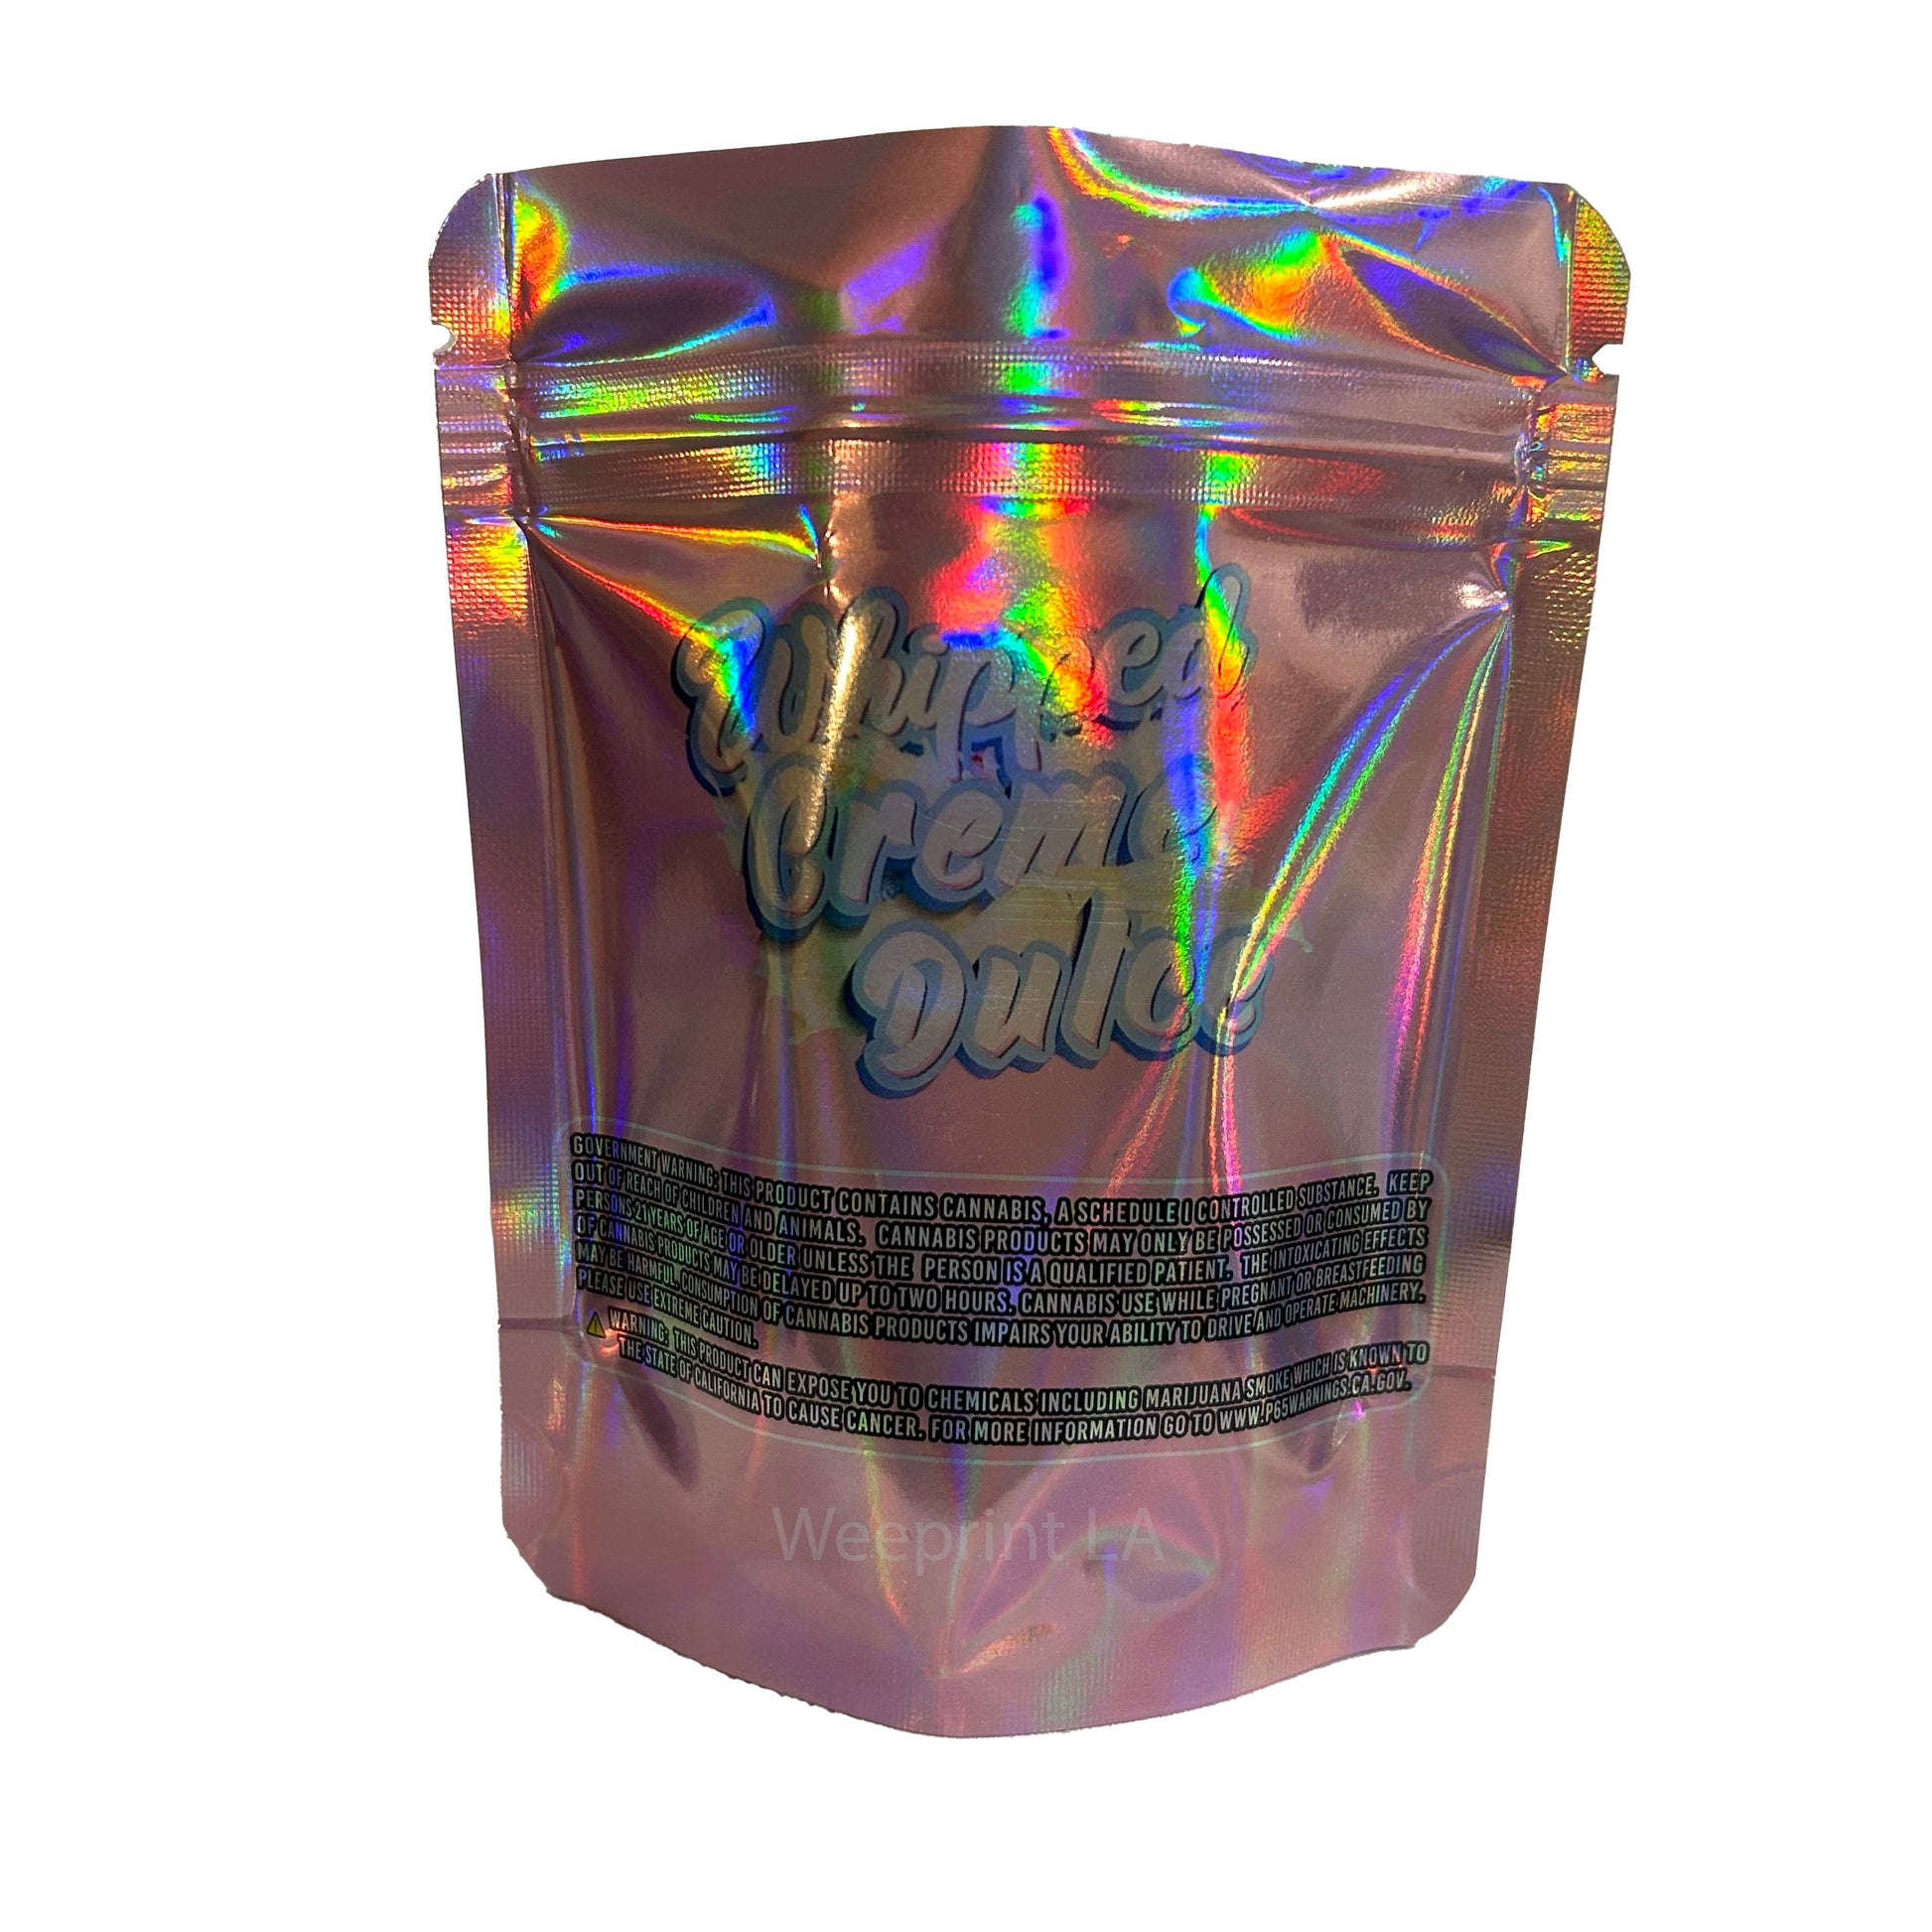 Whipped Creme Dulce 3.5G Mylar Bags, 3.5G Printed Mylar Bags.